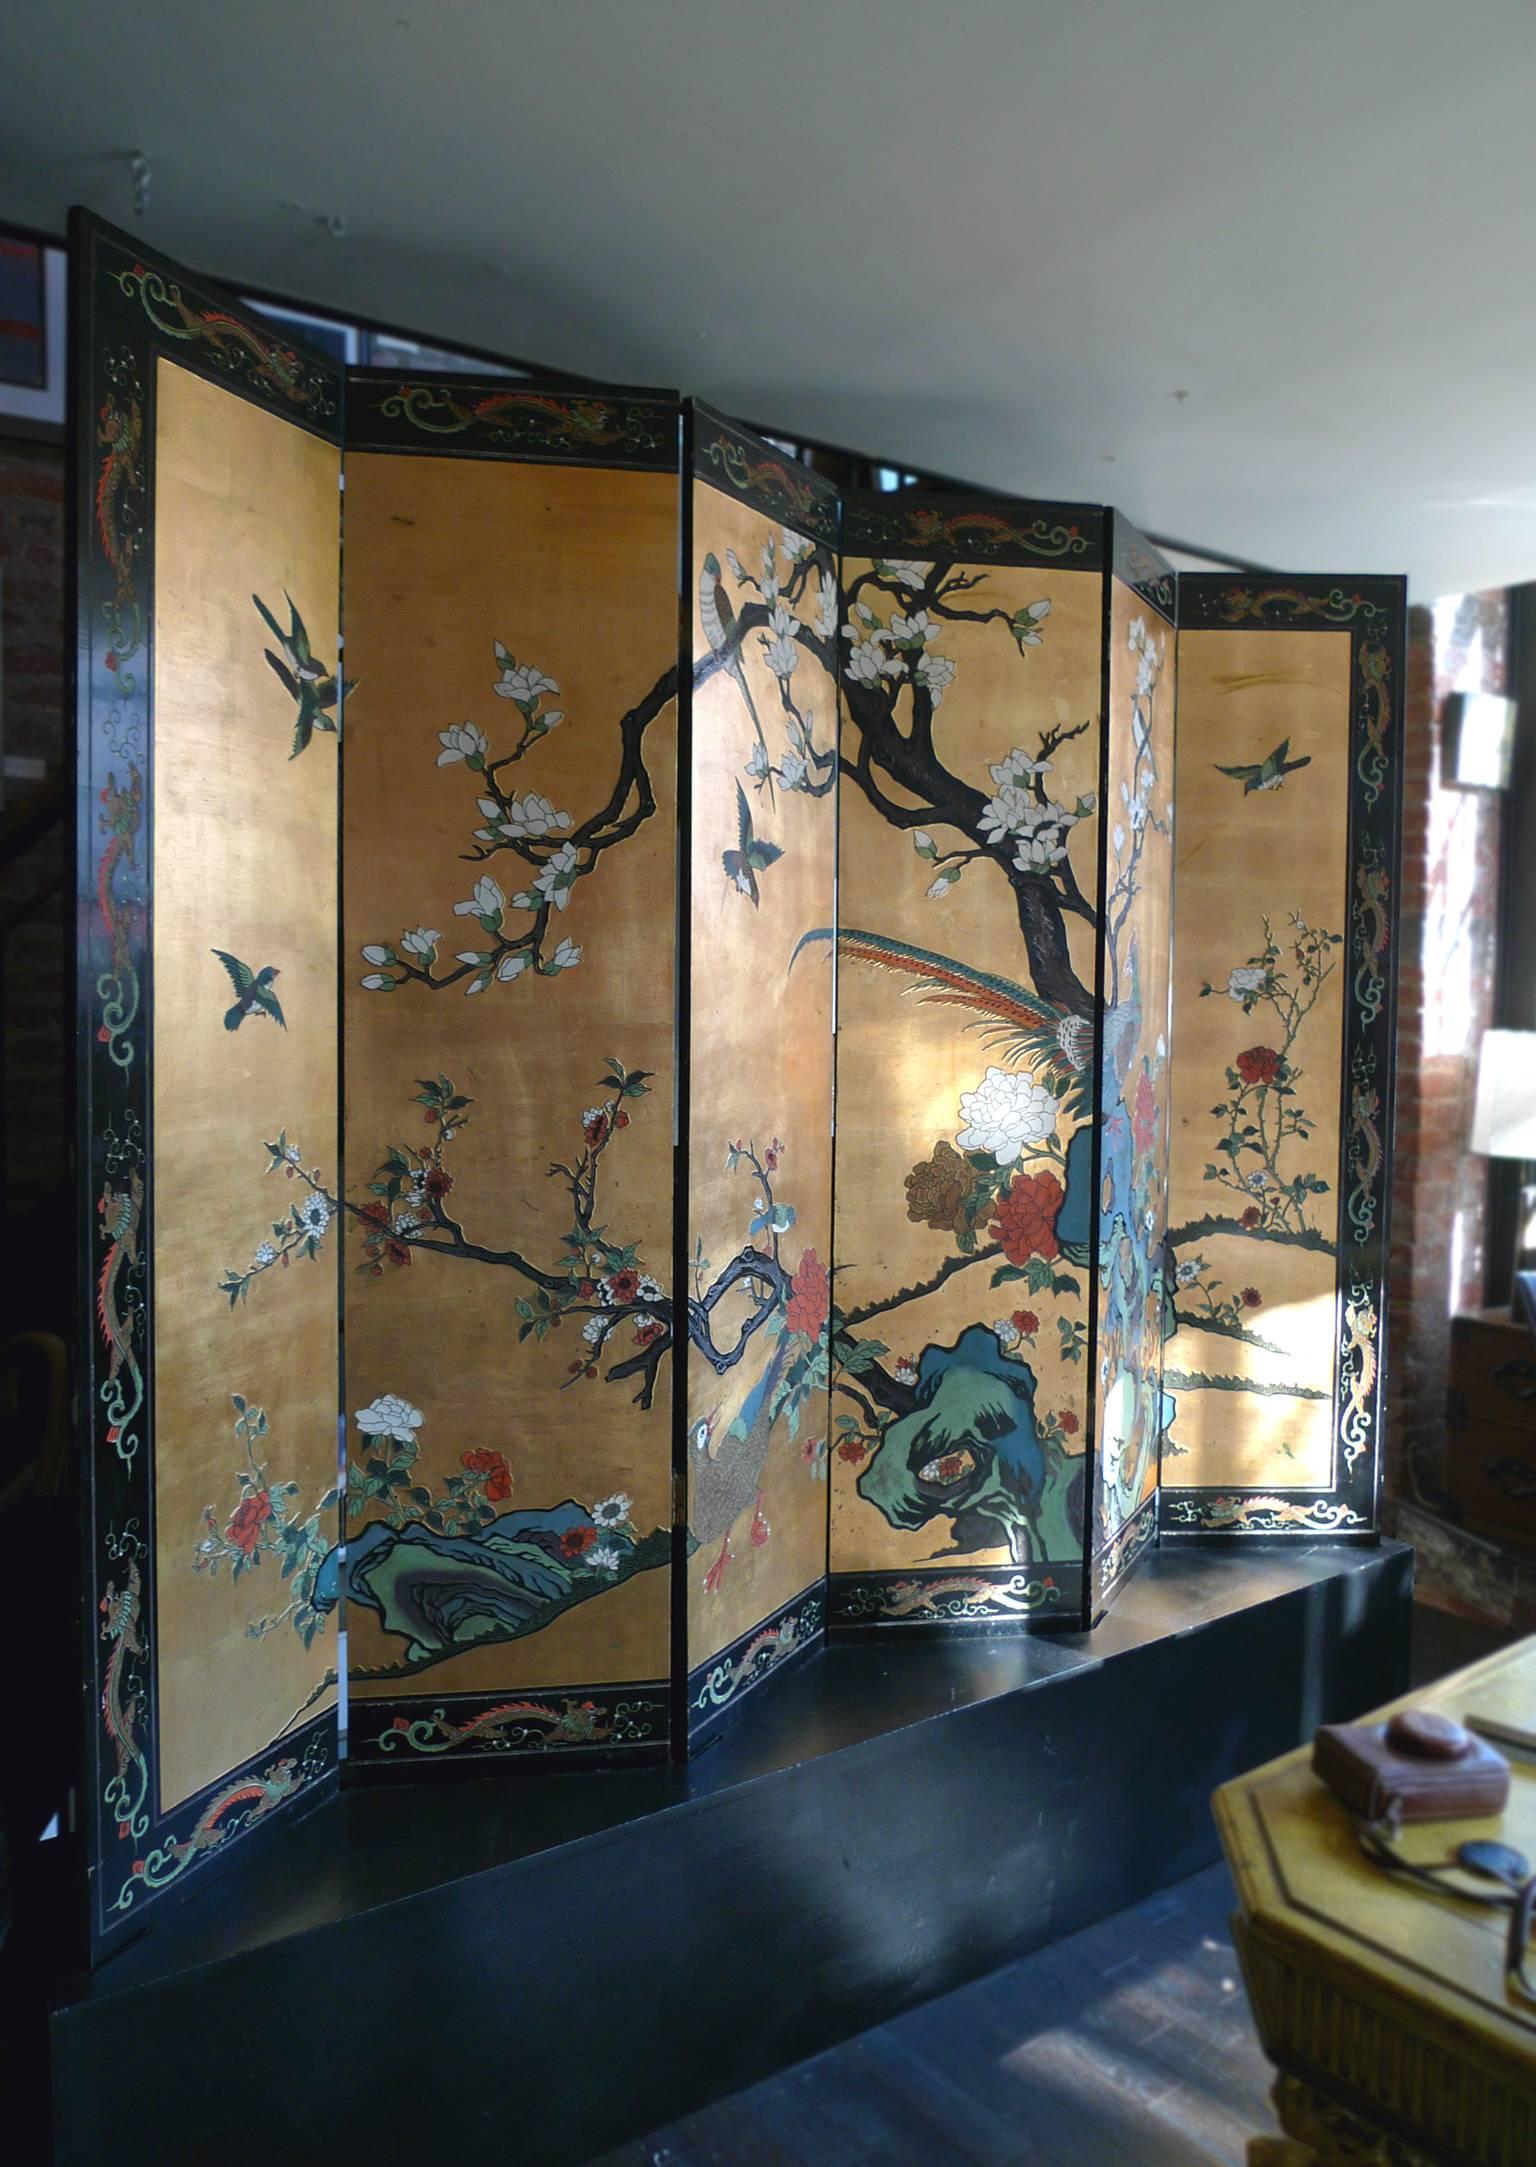 This 20th century Chinese folding screen has two beautifully painted sides. One side portrays a radiant daytime scene rendered in gold-leaf, with gnarled trees and colorful birds that are incised into the panels and painted in. The scene is framed